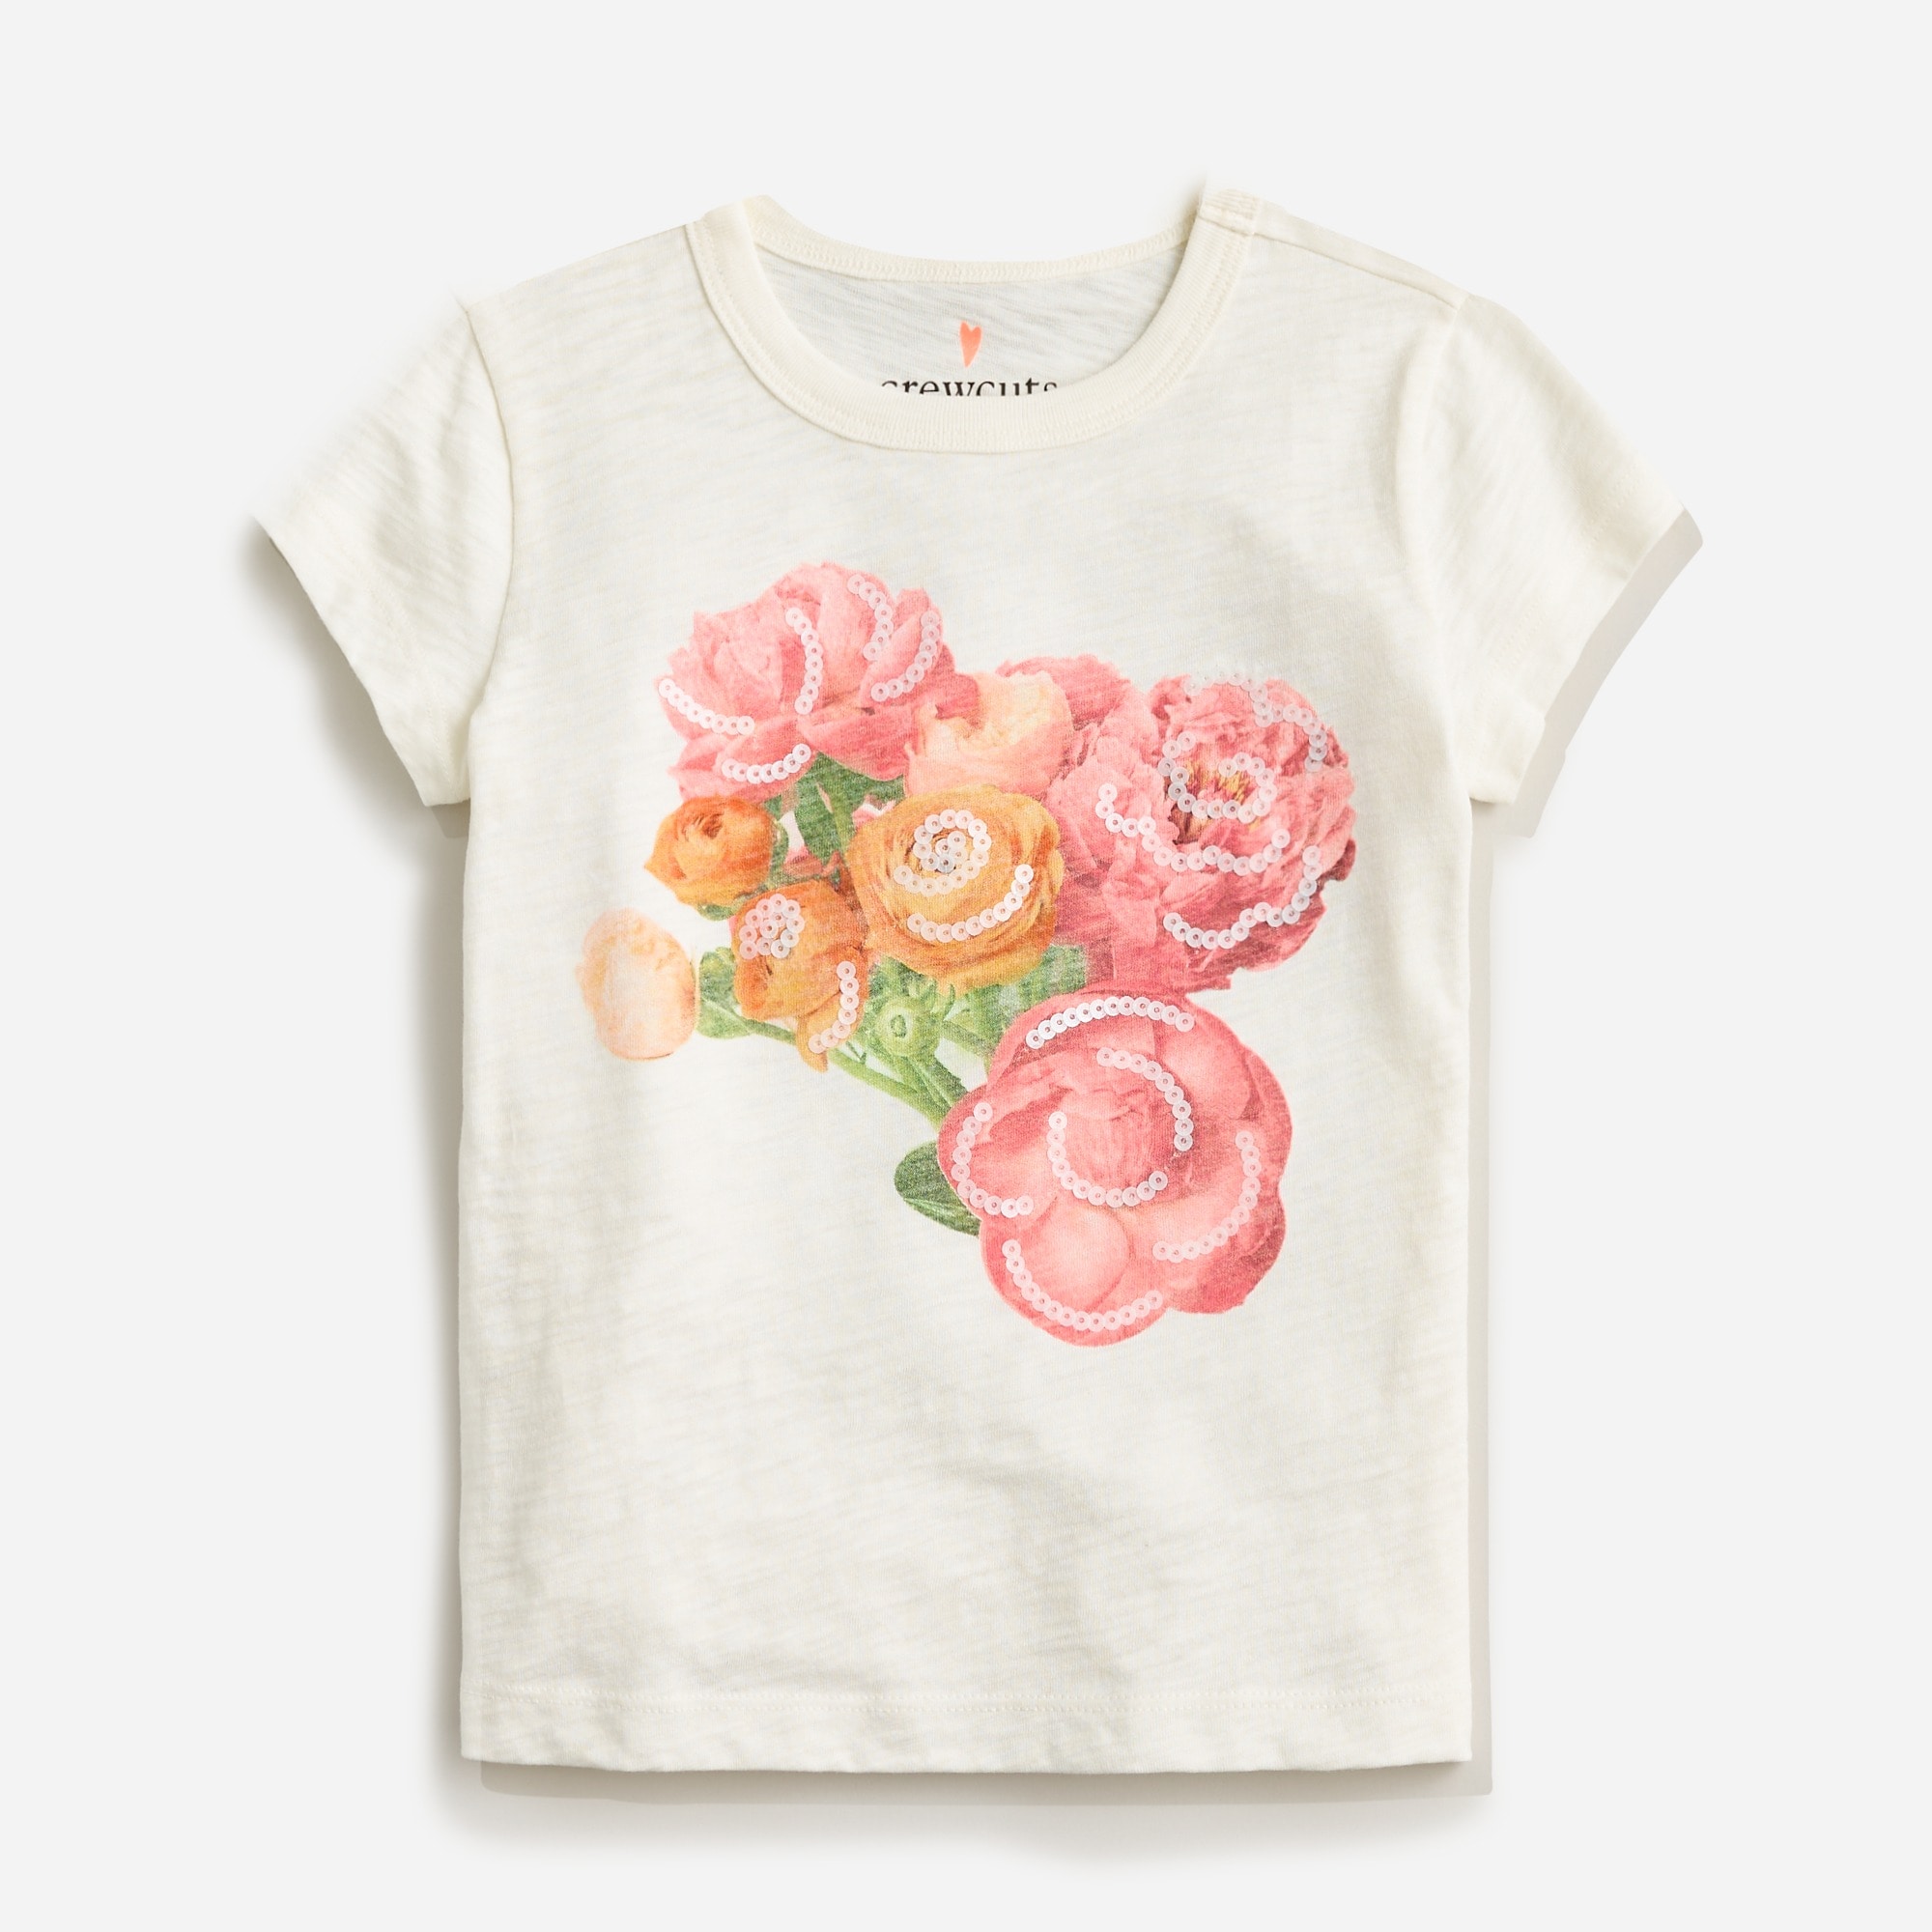  Girls' bouquet graphic T-shirt with sequins